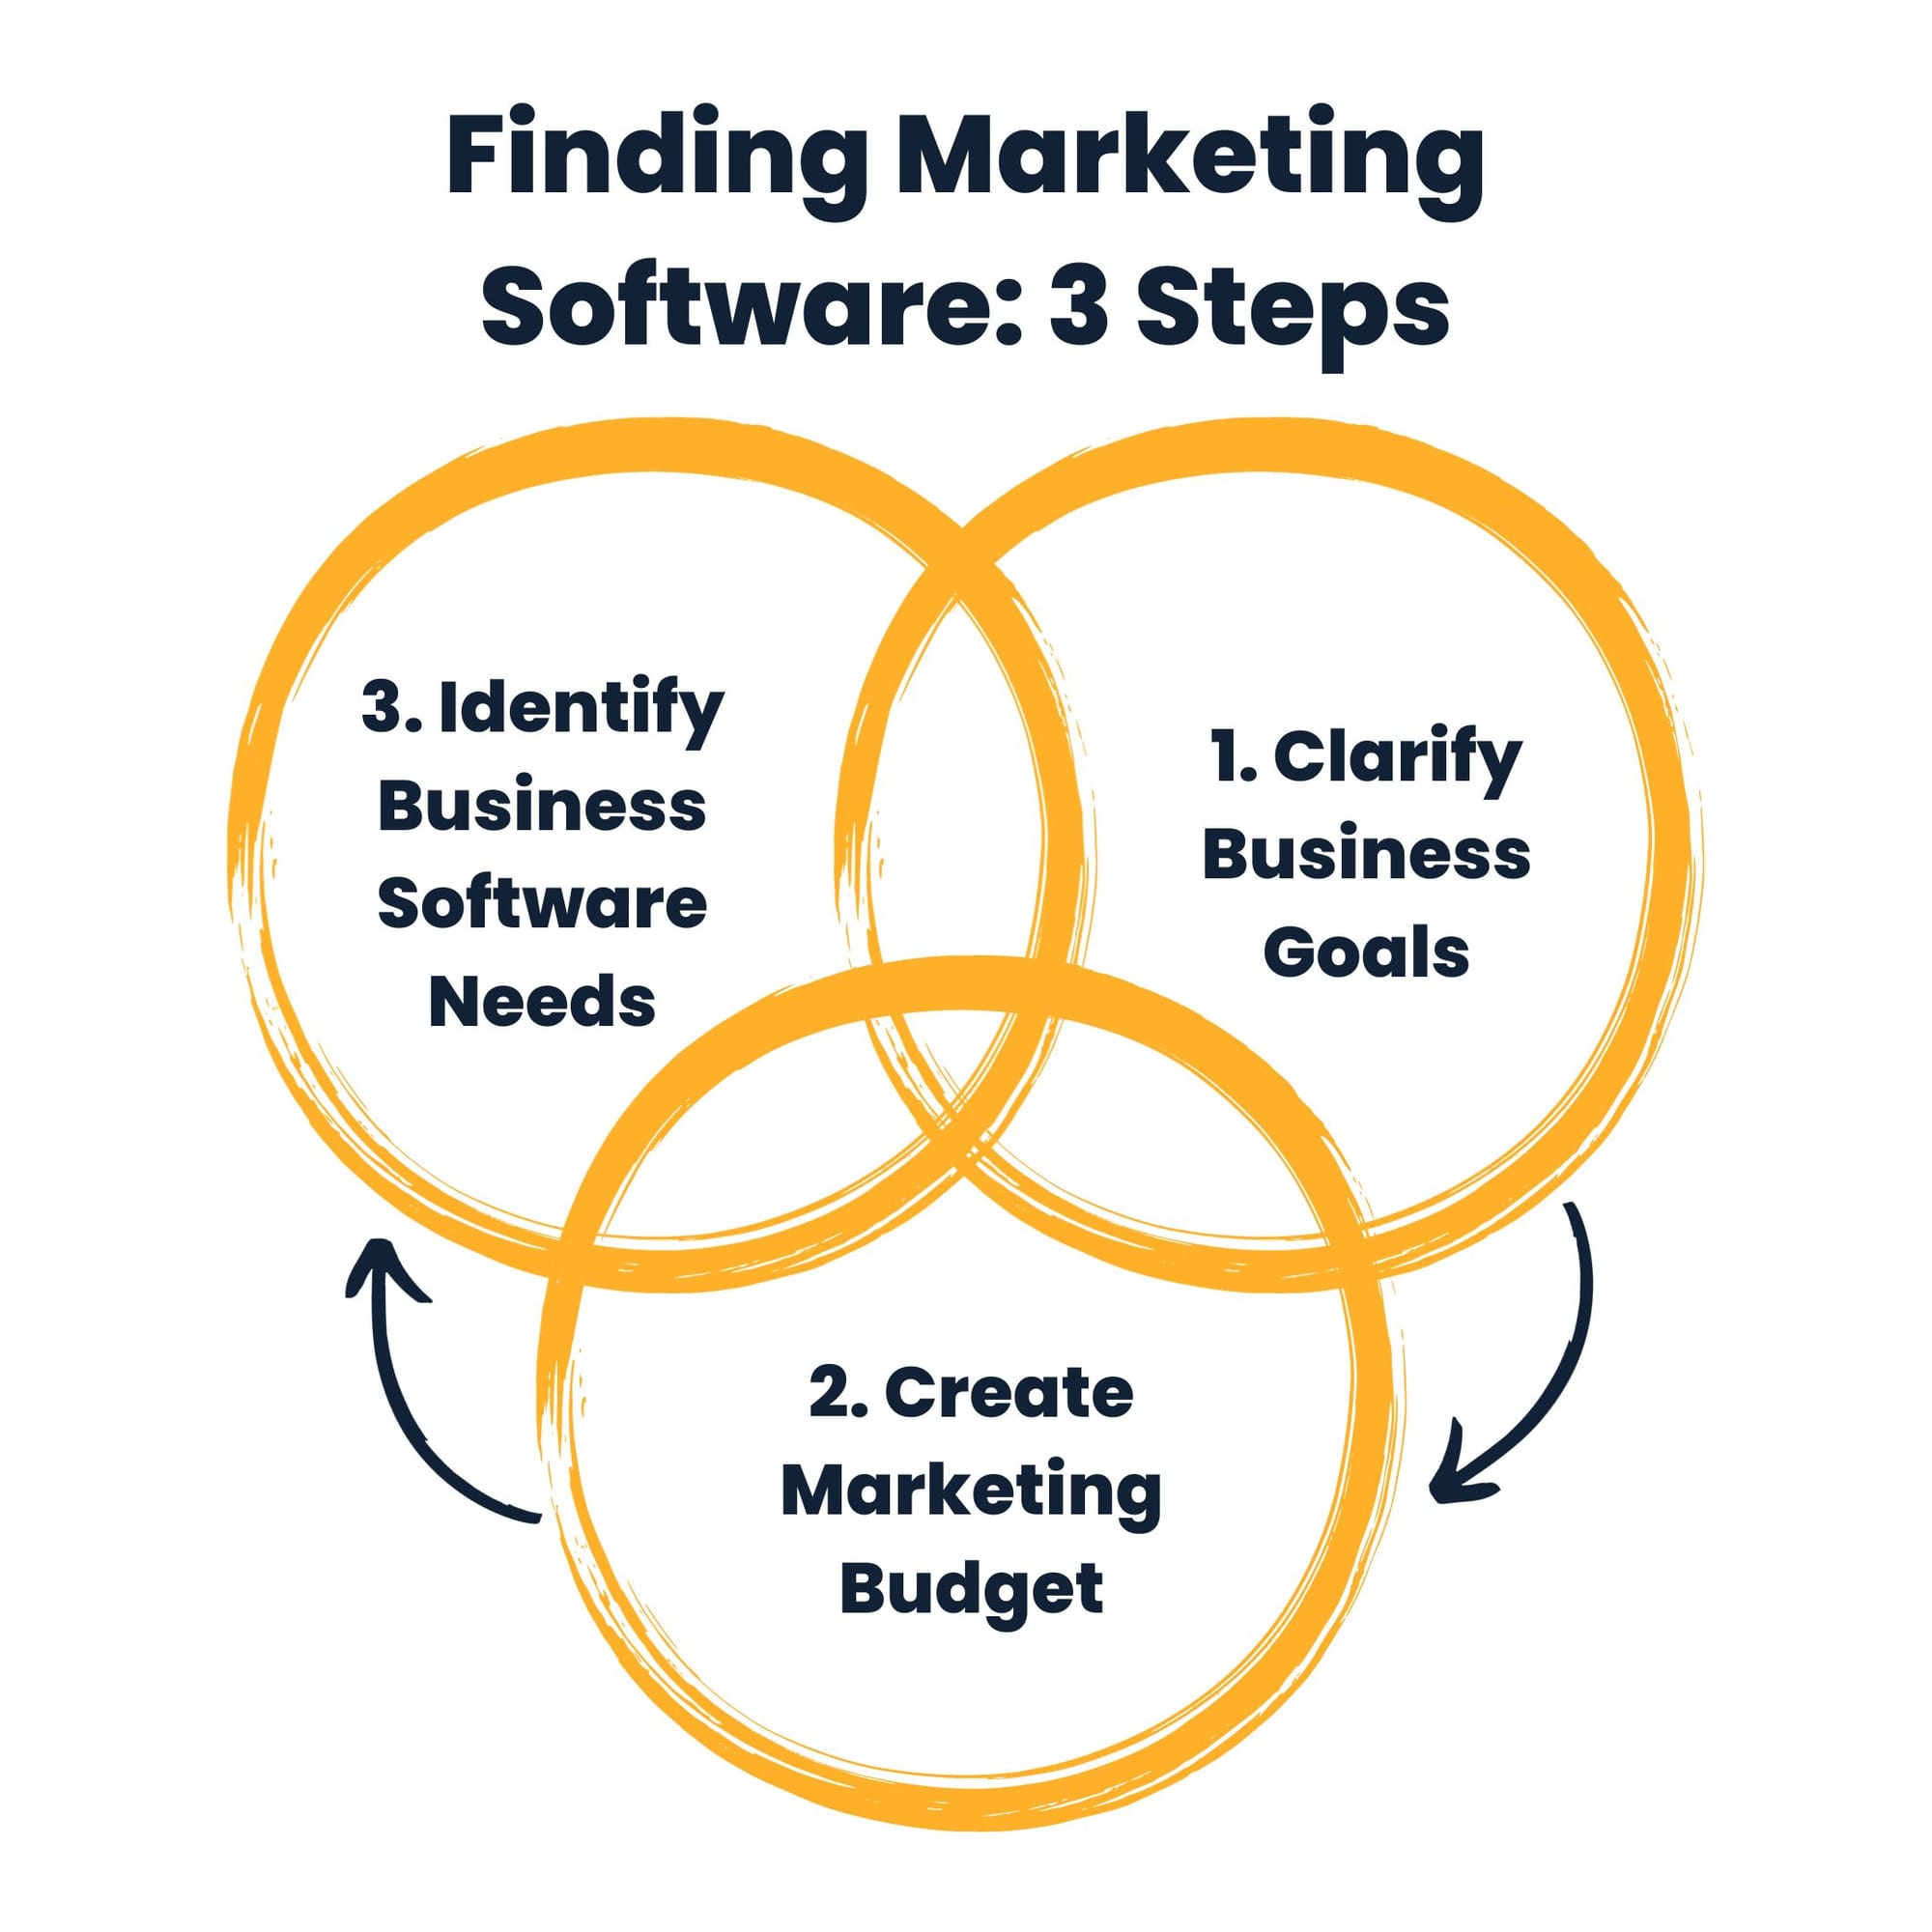 With over 8,000 marketing software options (Chief Martec) on the market, it's important to develop a method of finding what will work for you. Often, non-technical business owners rely too heavily on colleagues and not enough on their own business practices. The simplest way to find what you need is to clarify your business goals, define your marketing budget, and using your goals and budget, identify your software needs. 